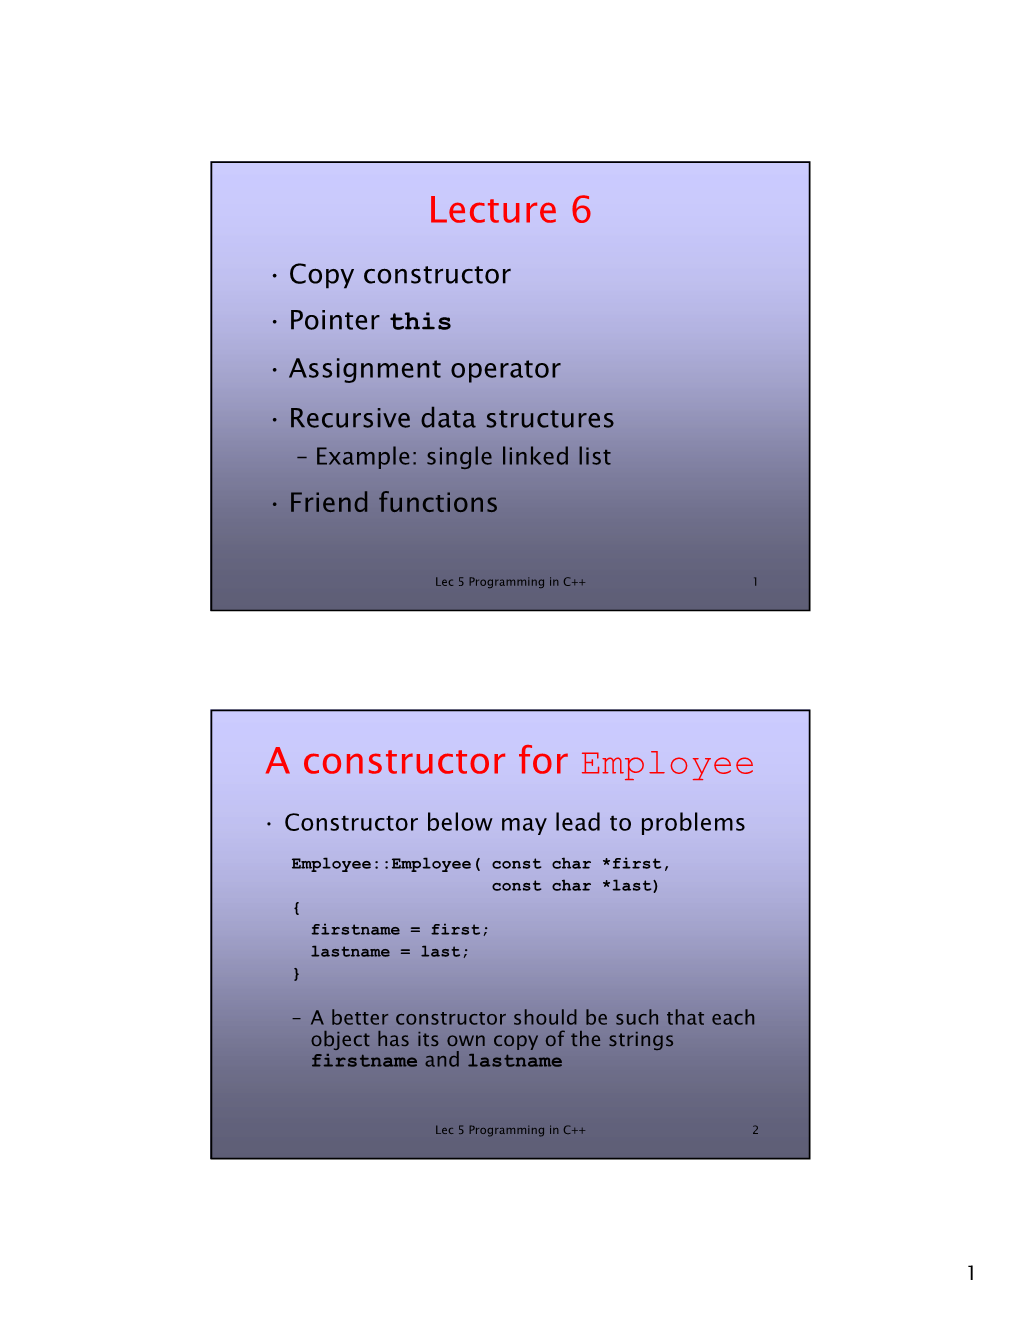 Lecture 6 a Constructor for Employee